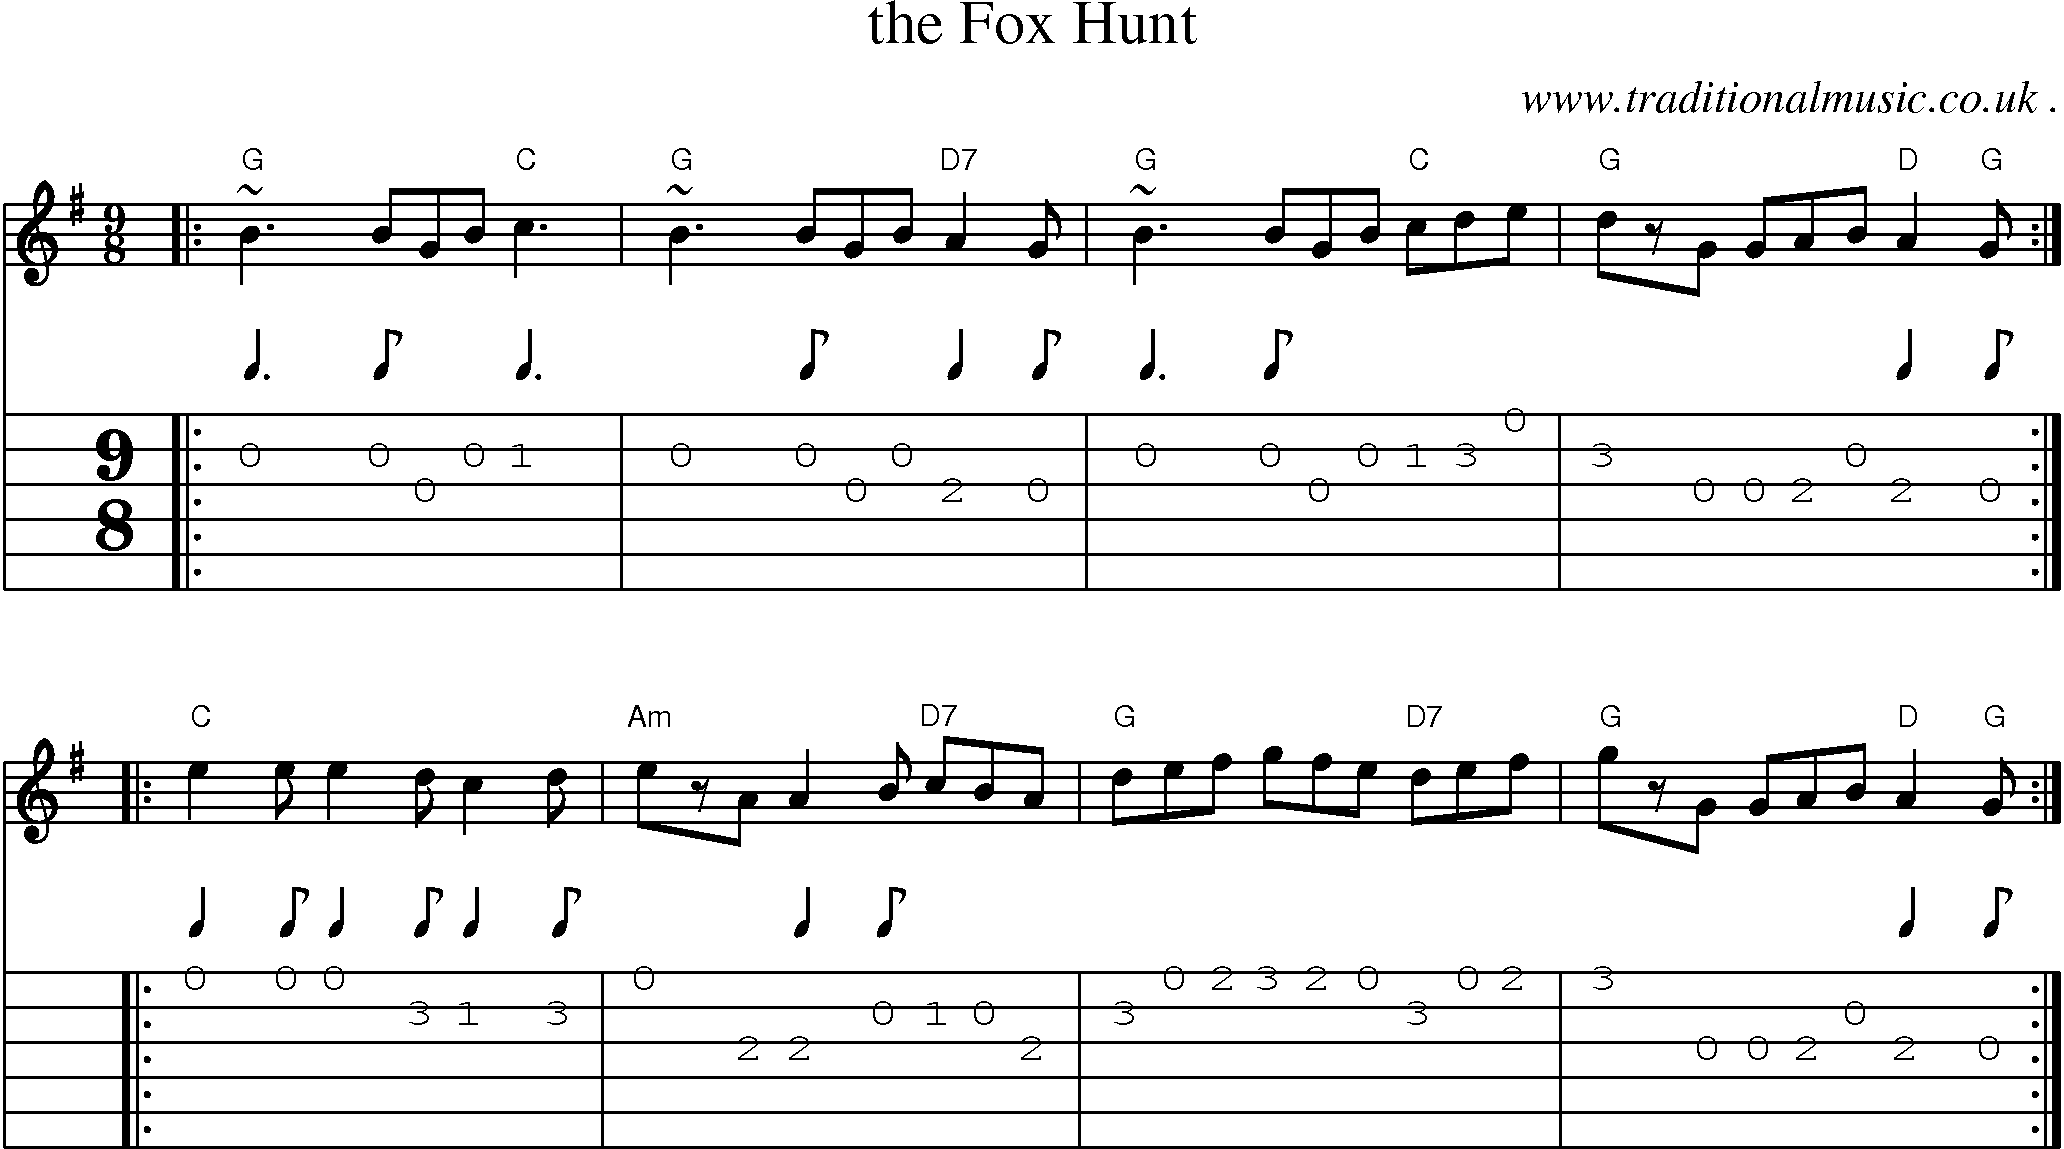 Sheet-music  score, Chords and Guitar Tabs for The Fox Hunt